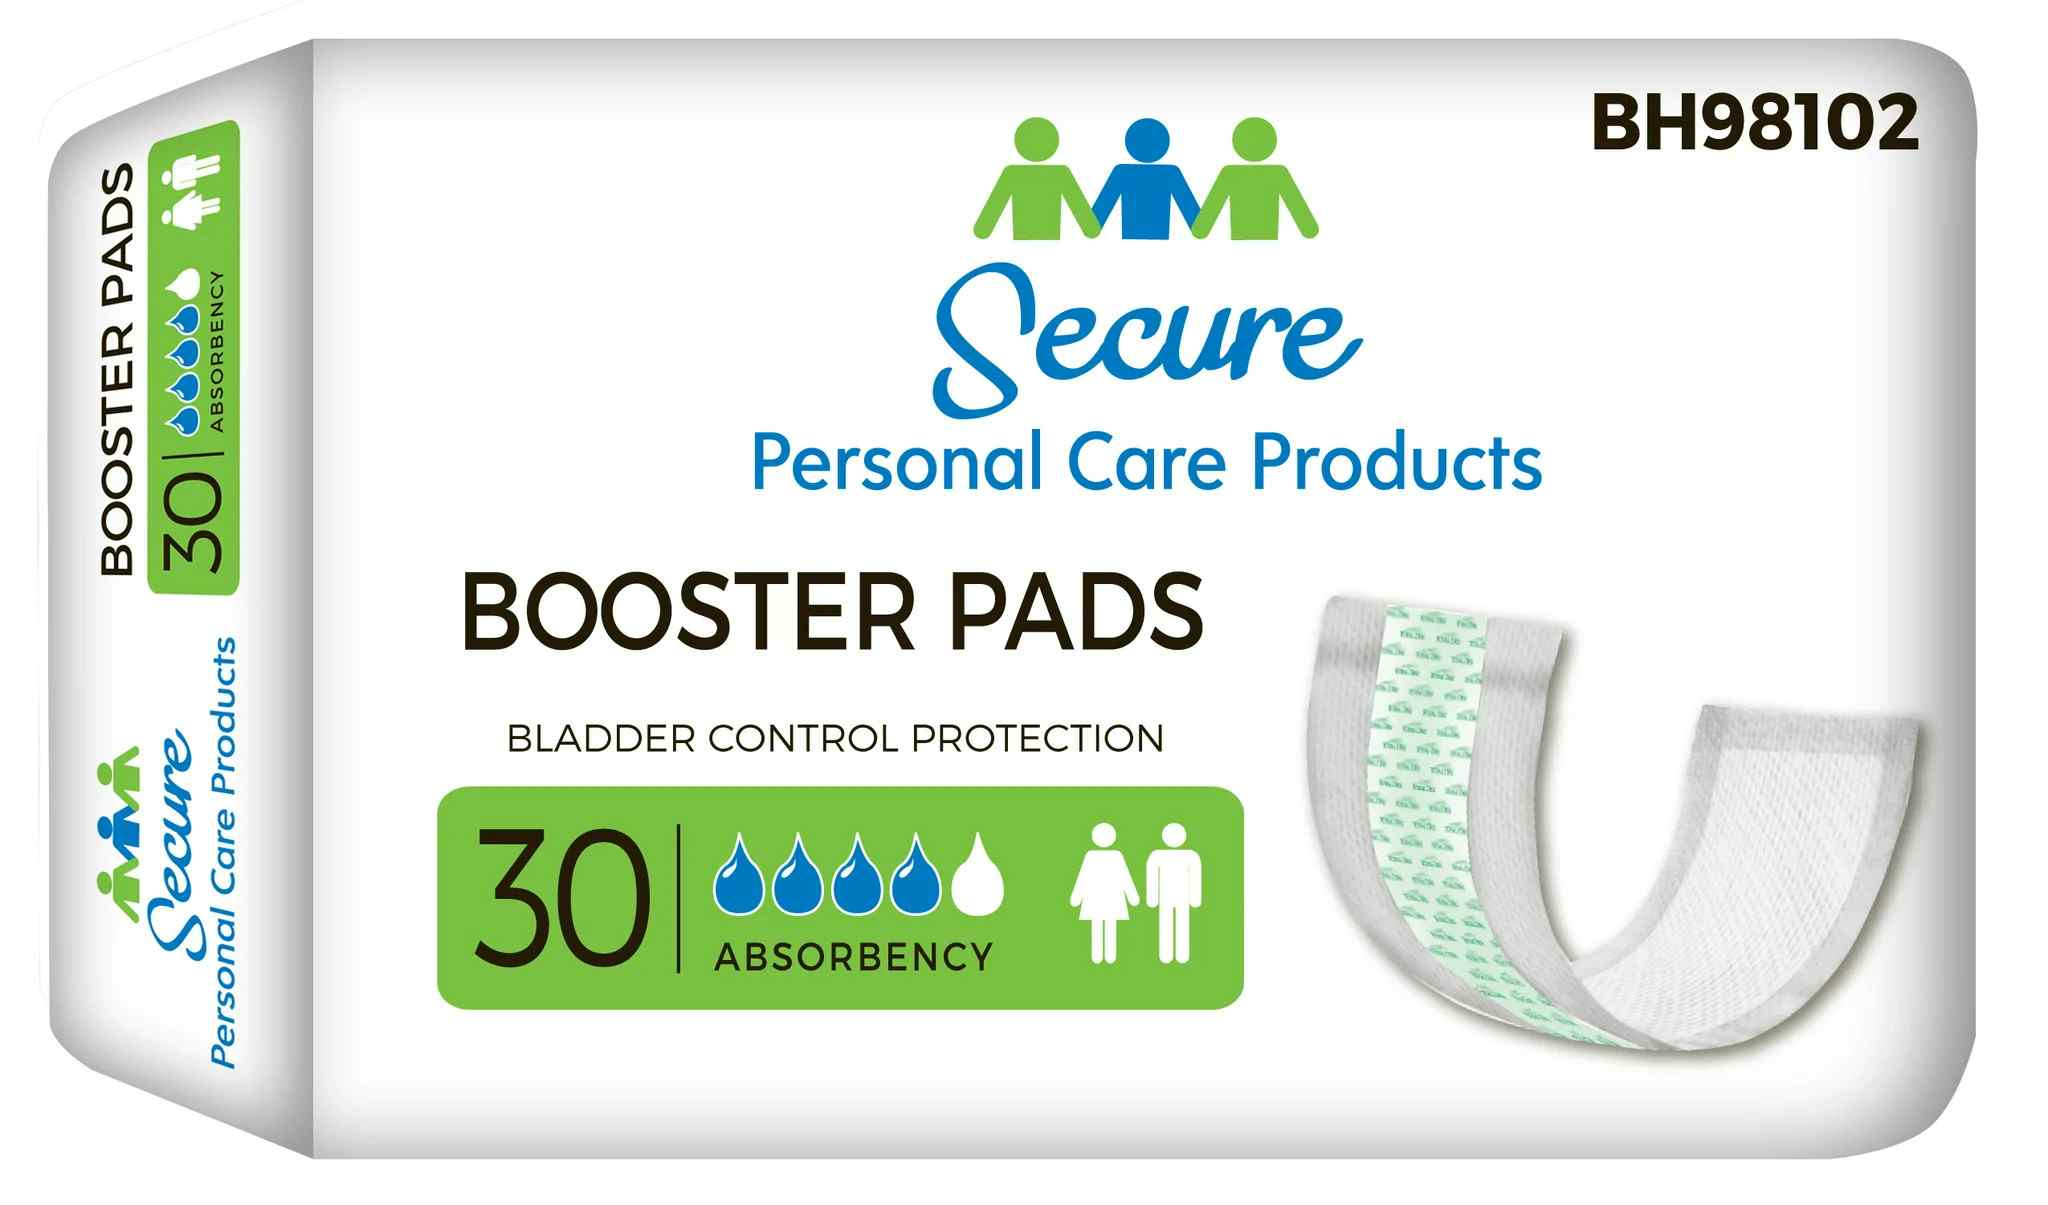 Secure Personal Care Products Duo Booster Pads, Maximum Absorbency, BH98102, Bag of 30